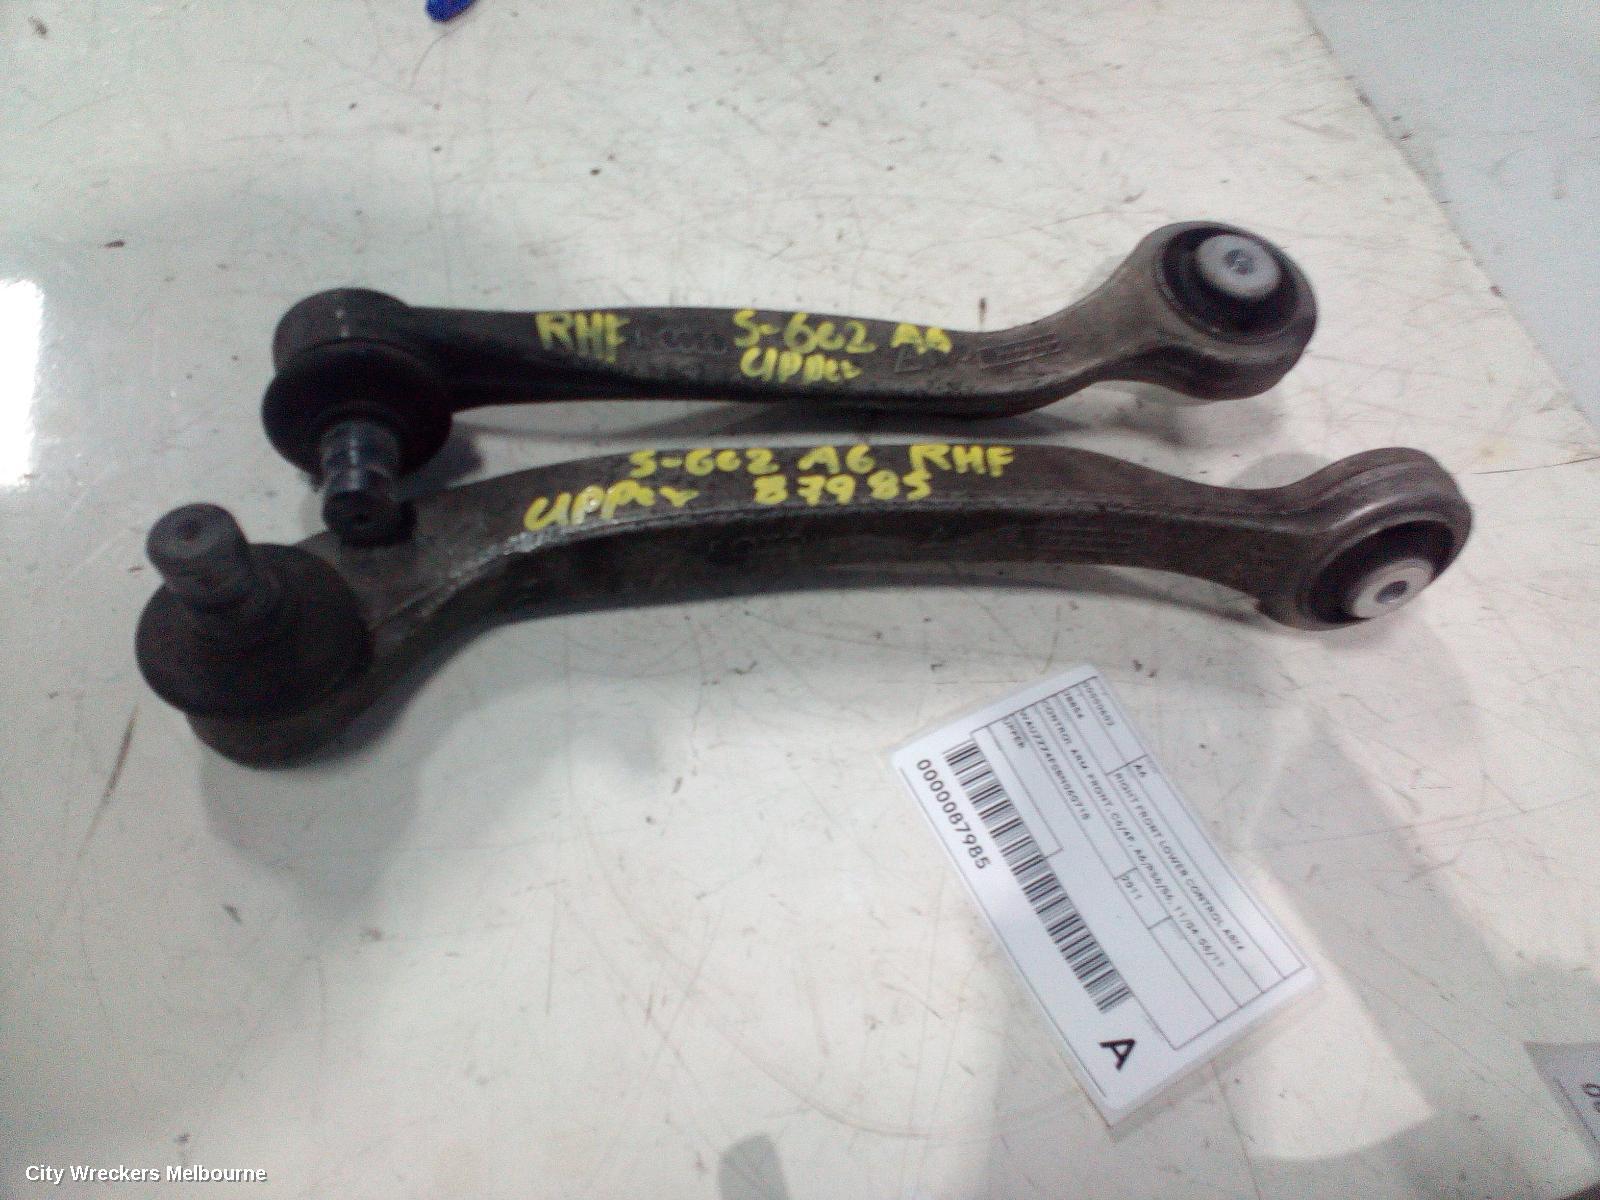 AUDI A6 2011 Right Front Lower Control Arm